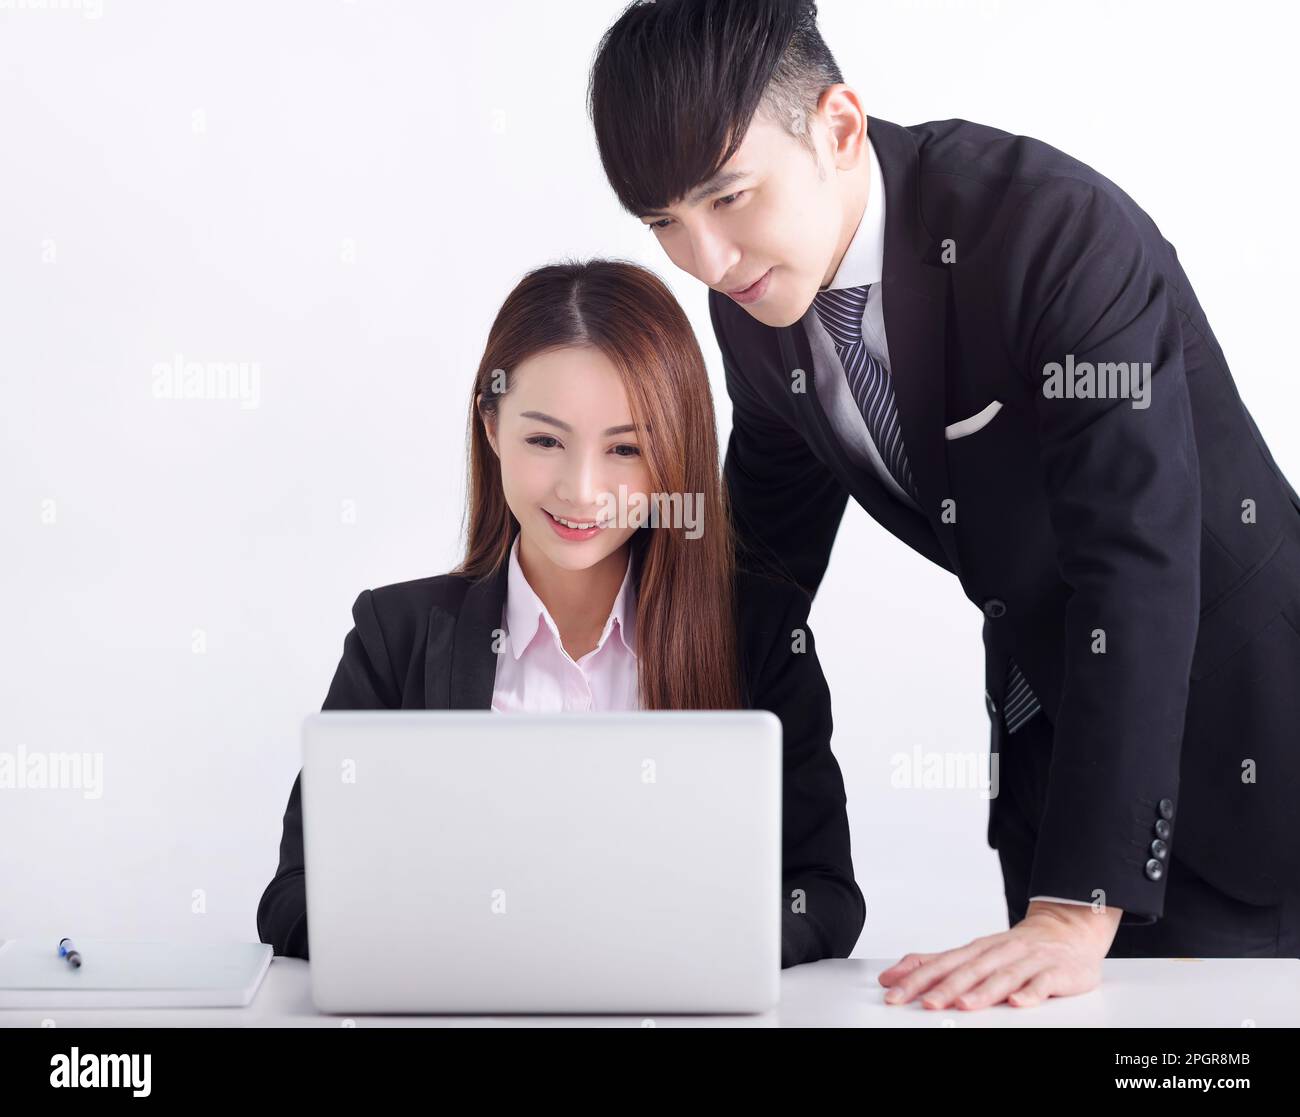 Business  team using laptop and working together in office Stock Photo